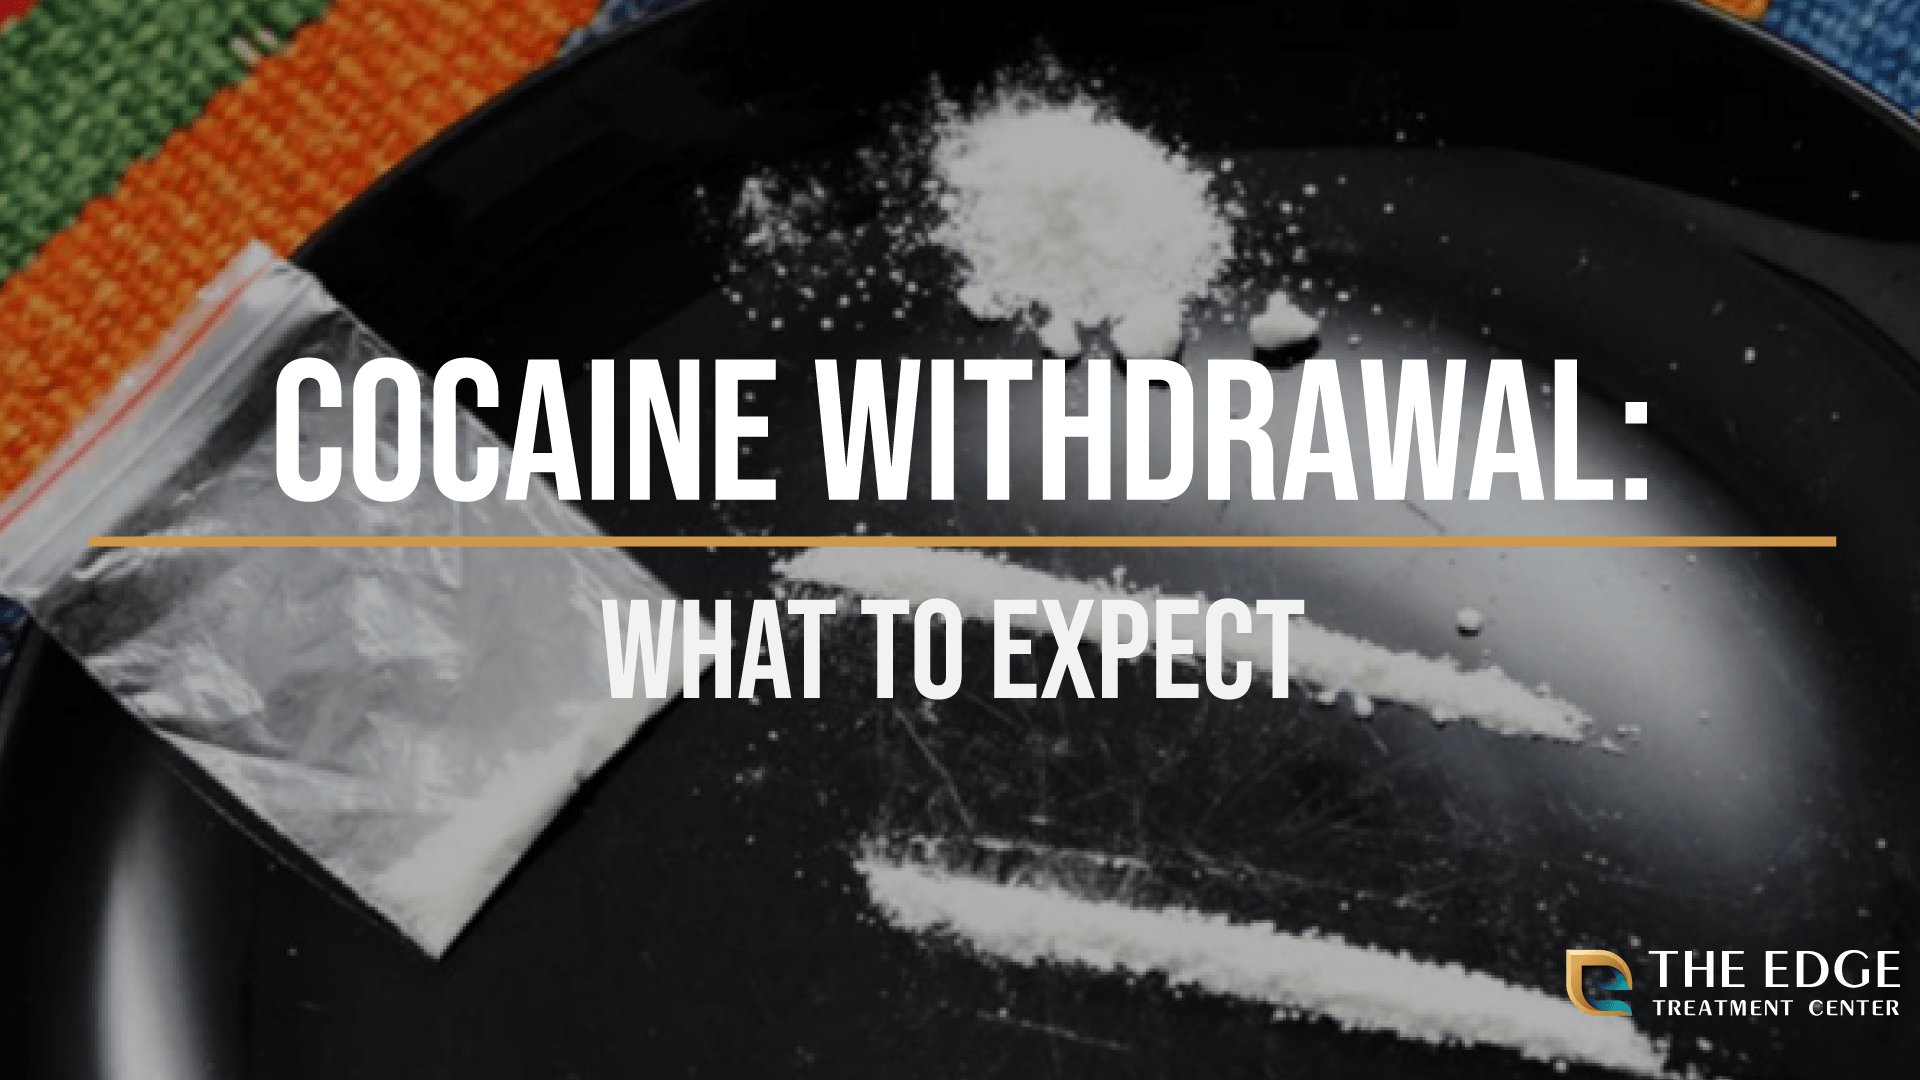 What is Cocaine Withdrawal Like?